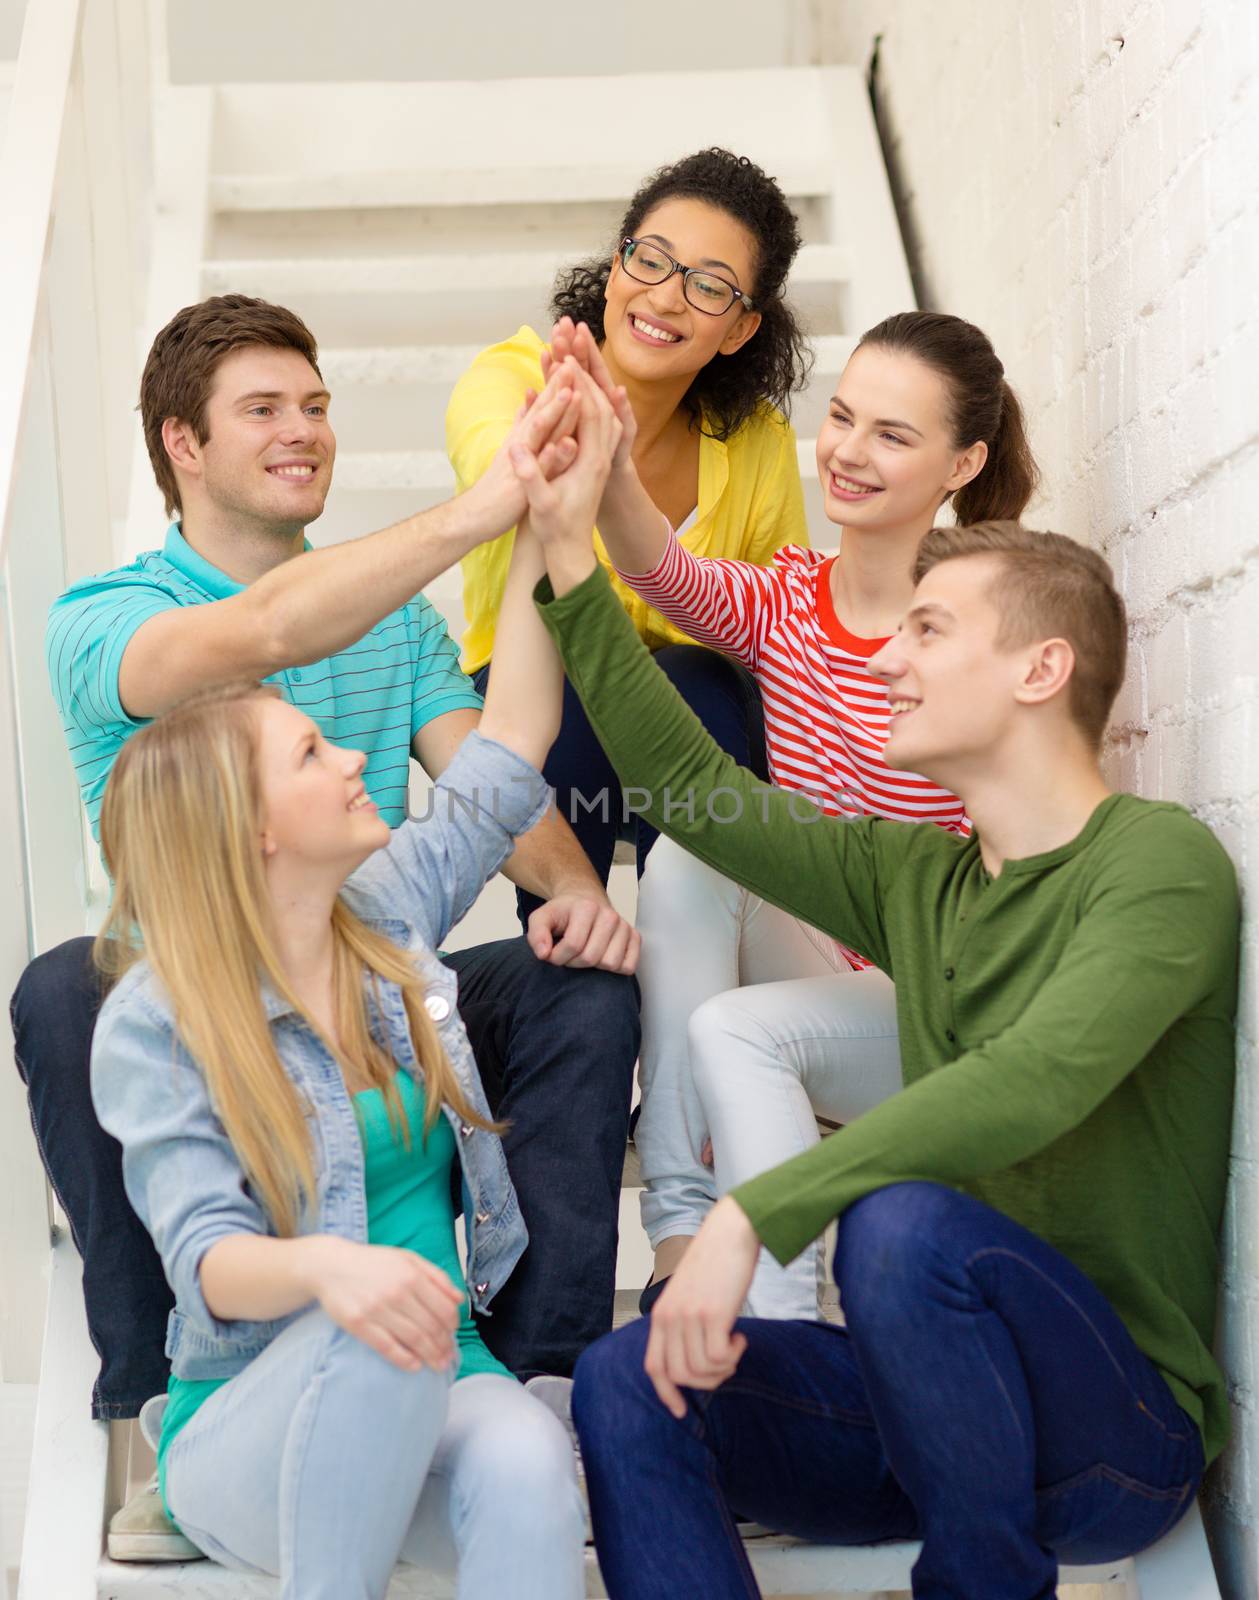 education and happiness concept - smiling students making high five gesture sitting on staircase